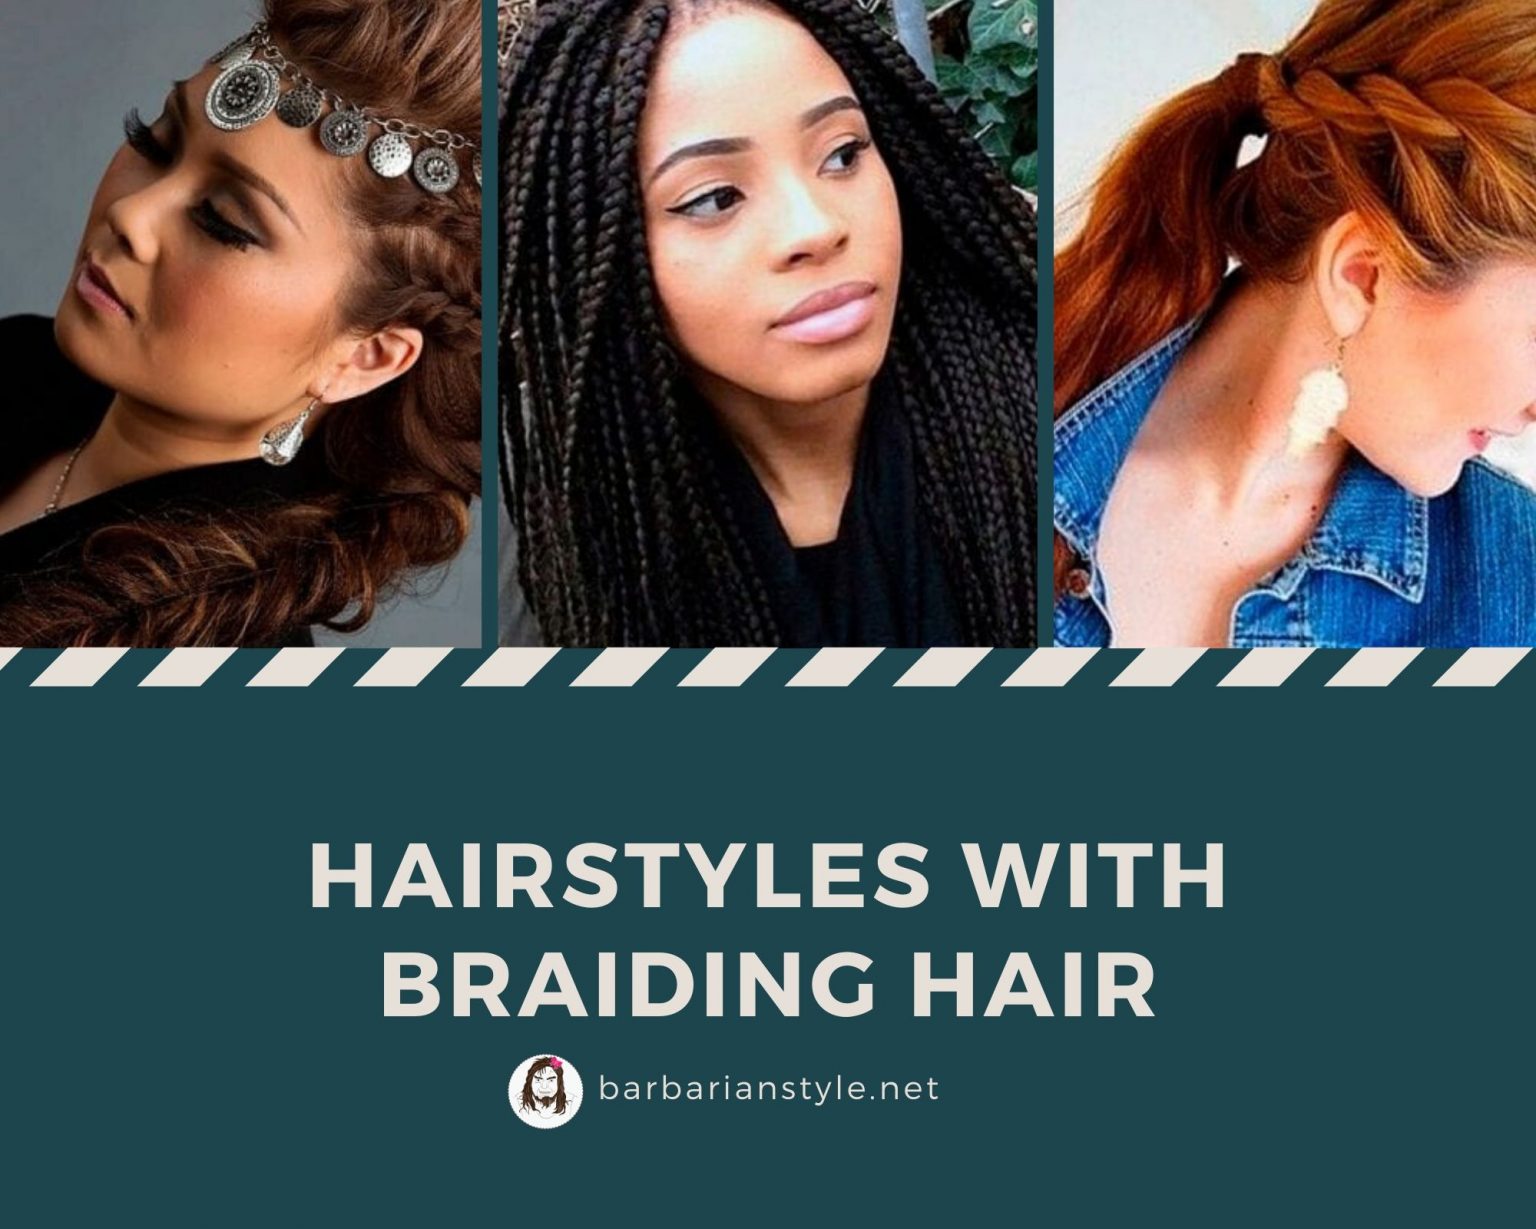 The Most Fashion Hairstyles with Braiding Hair in 2020